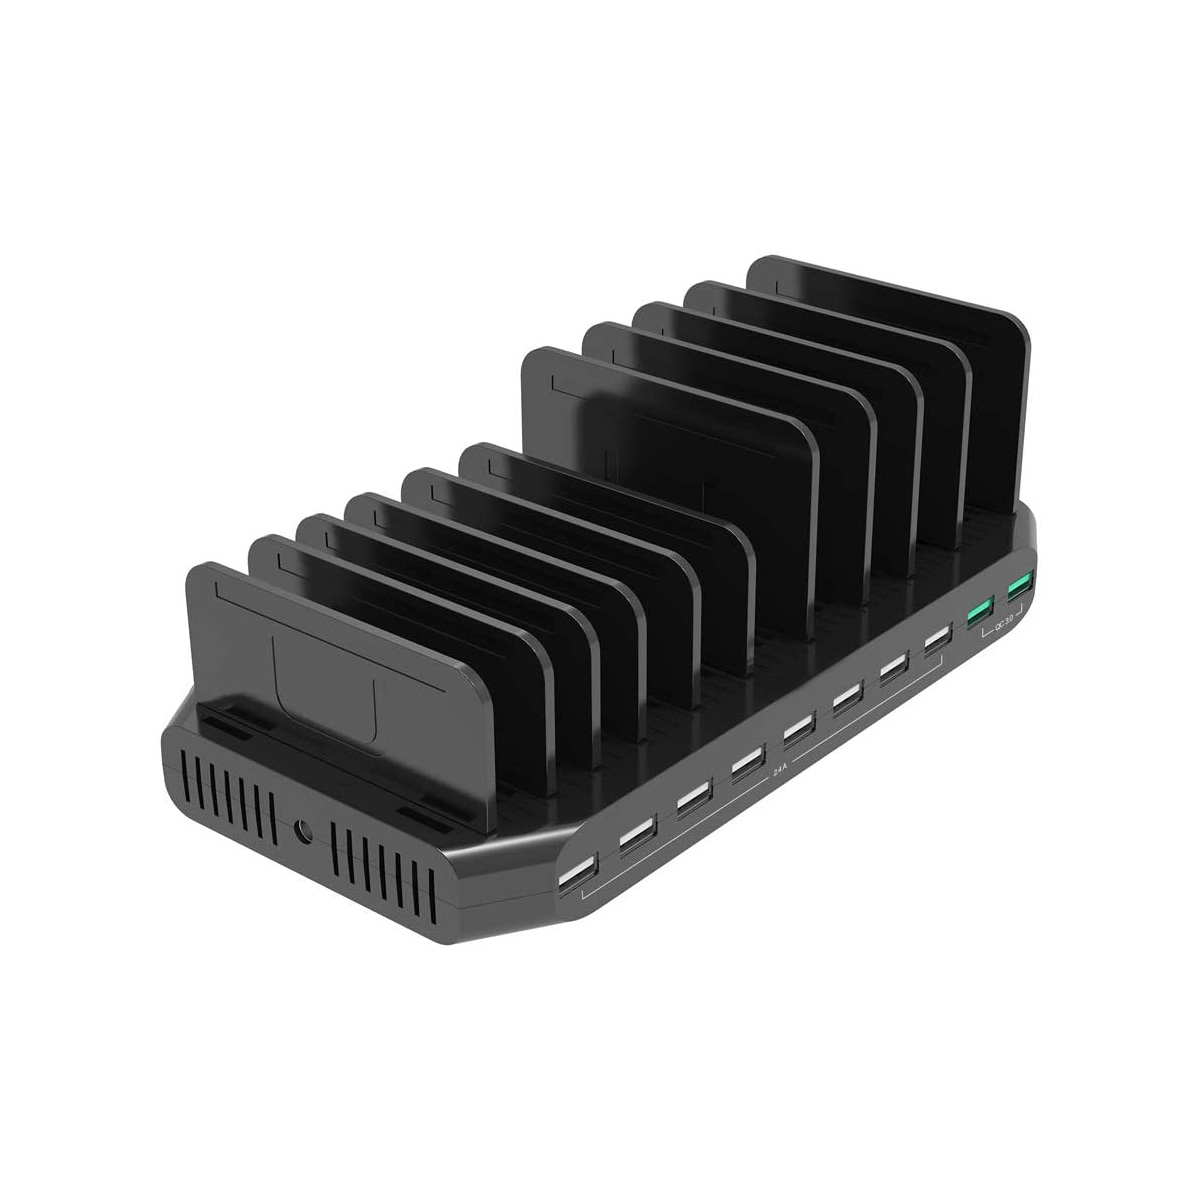 10 Mains USB Charging Station | Scan